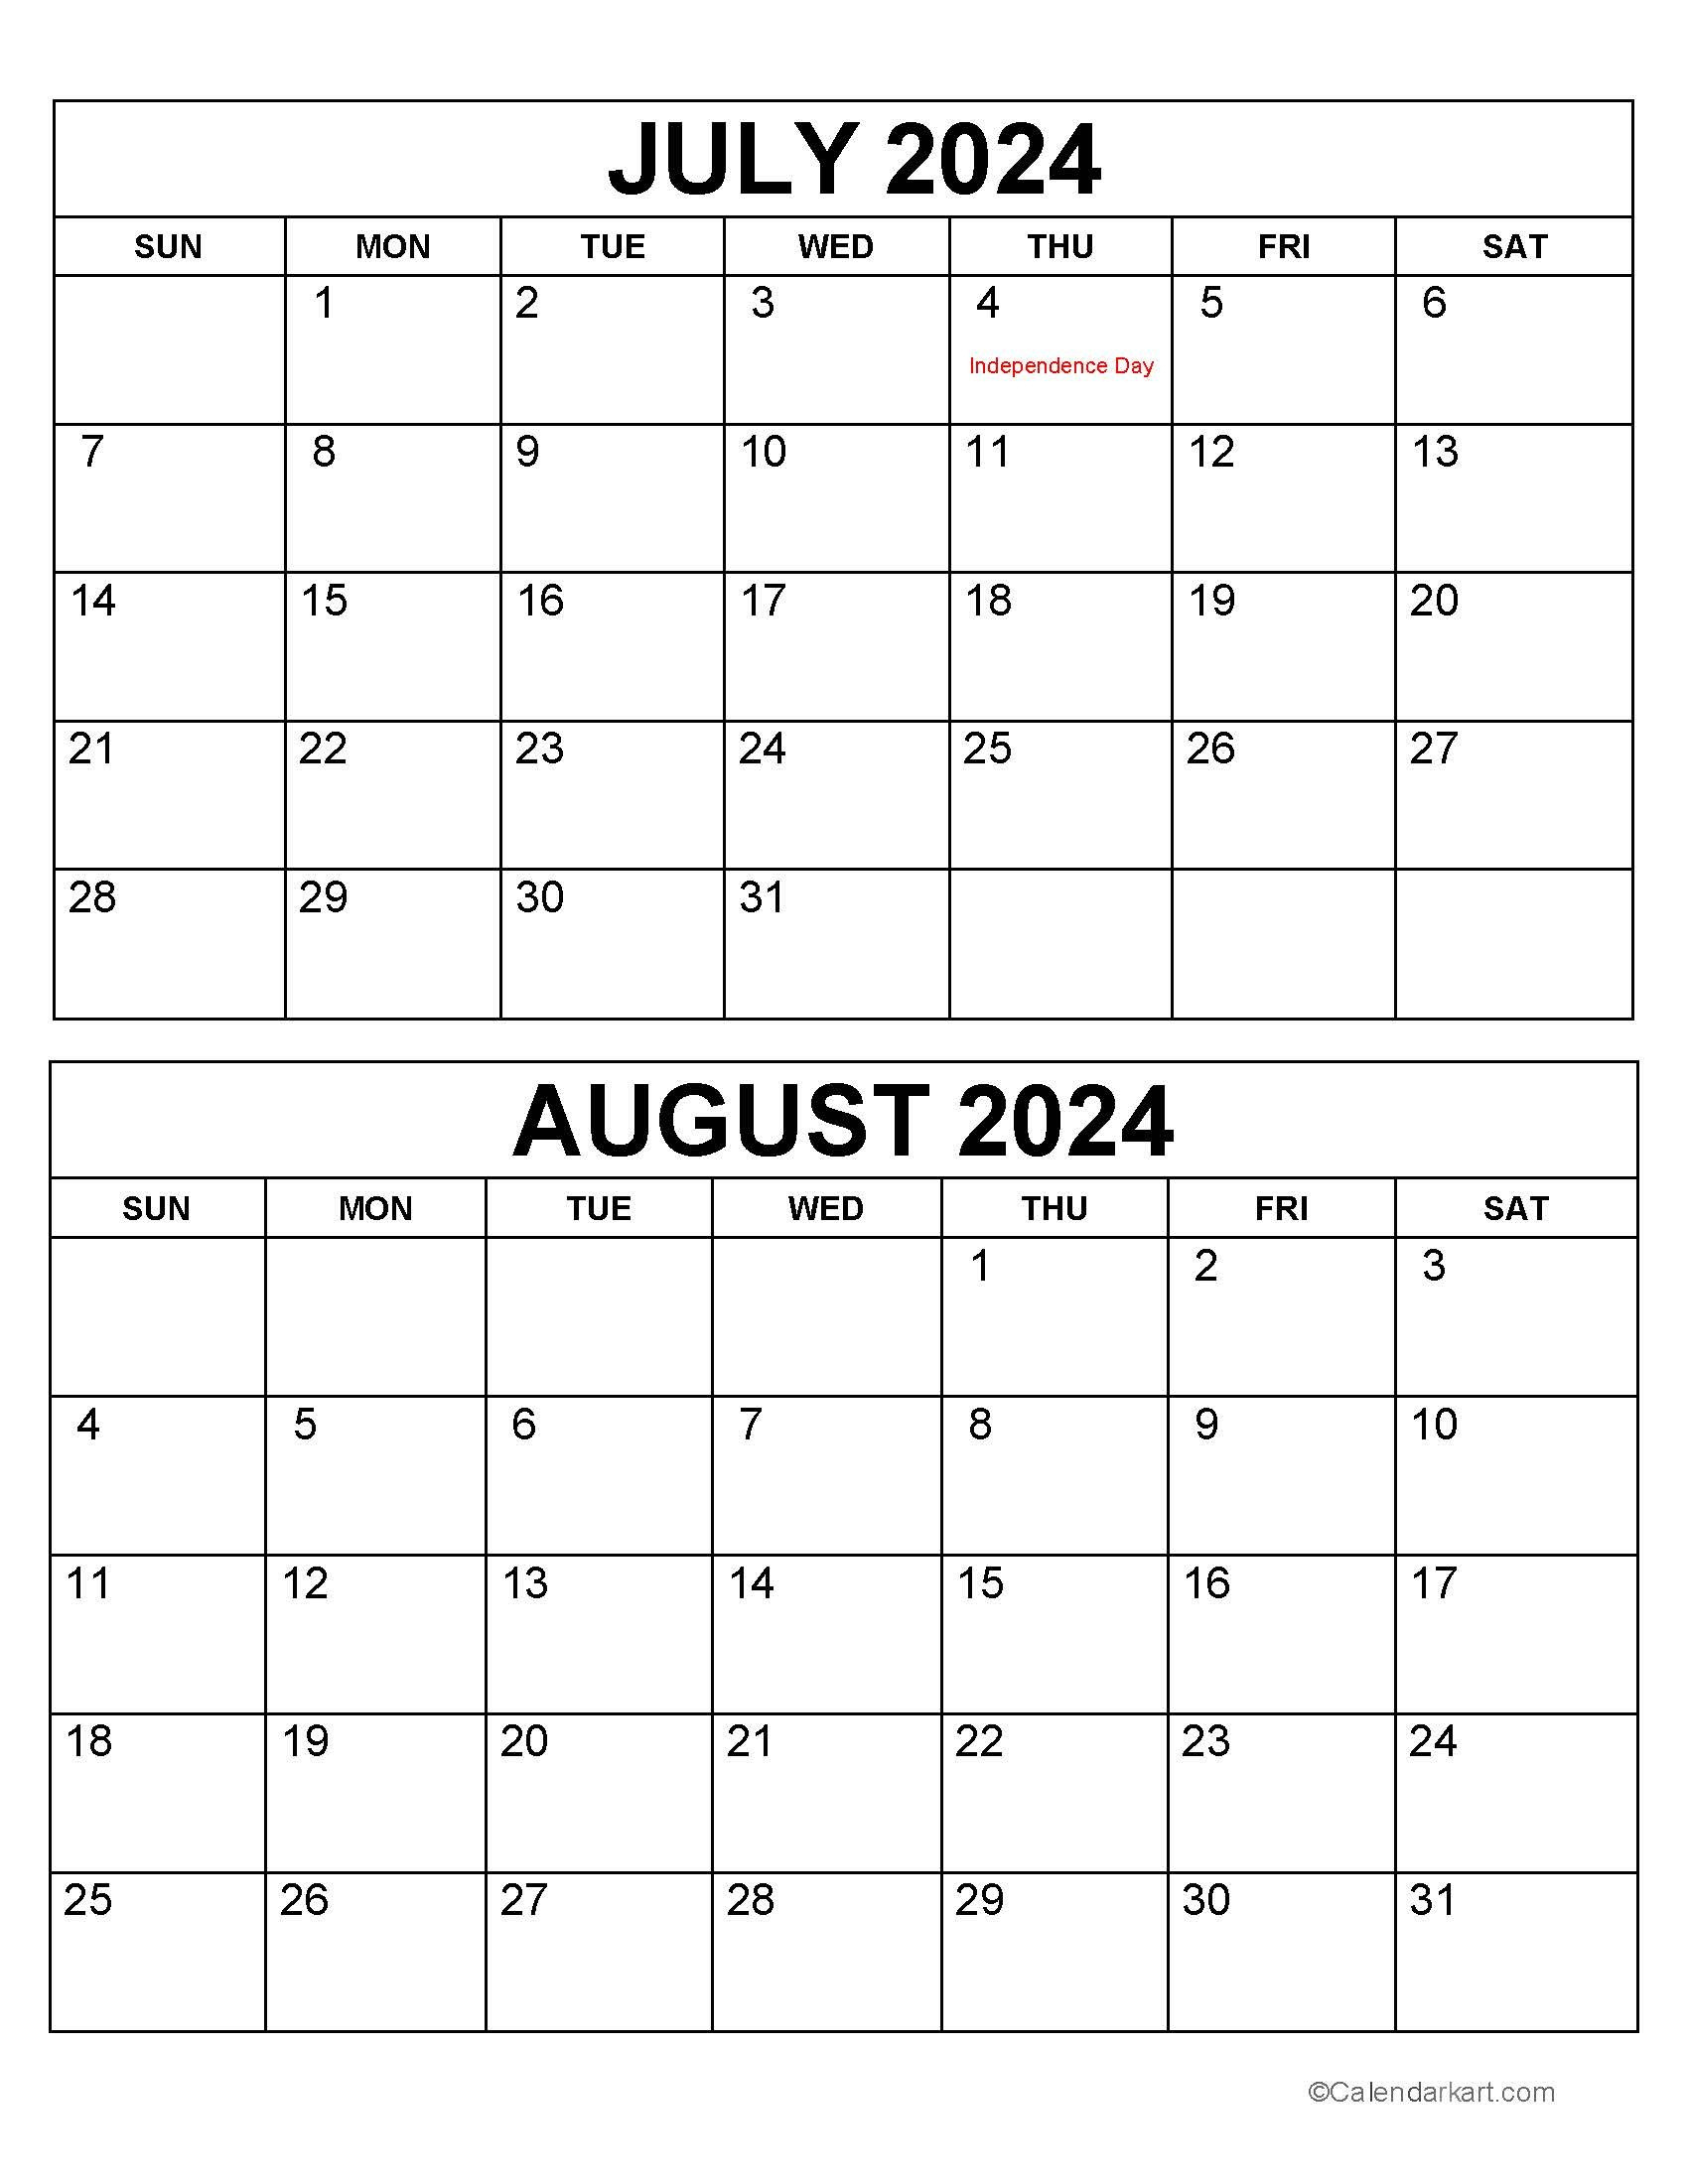 Printable July August 2024 Calendar | Calendarkart pertaining to Calendar For the Month of July and August 2024